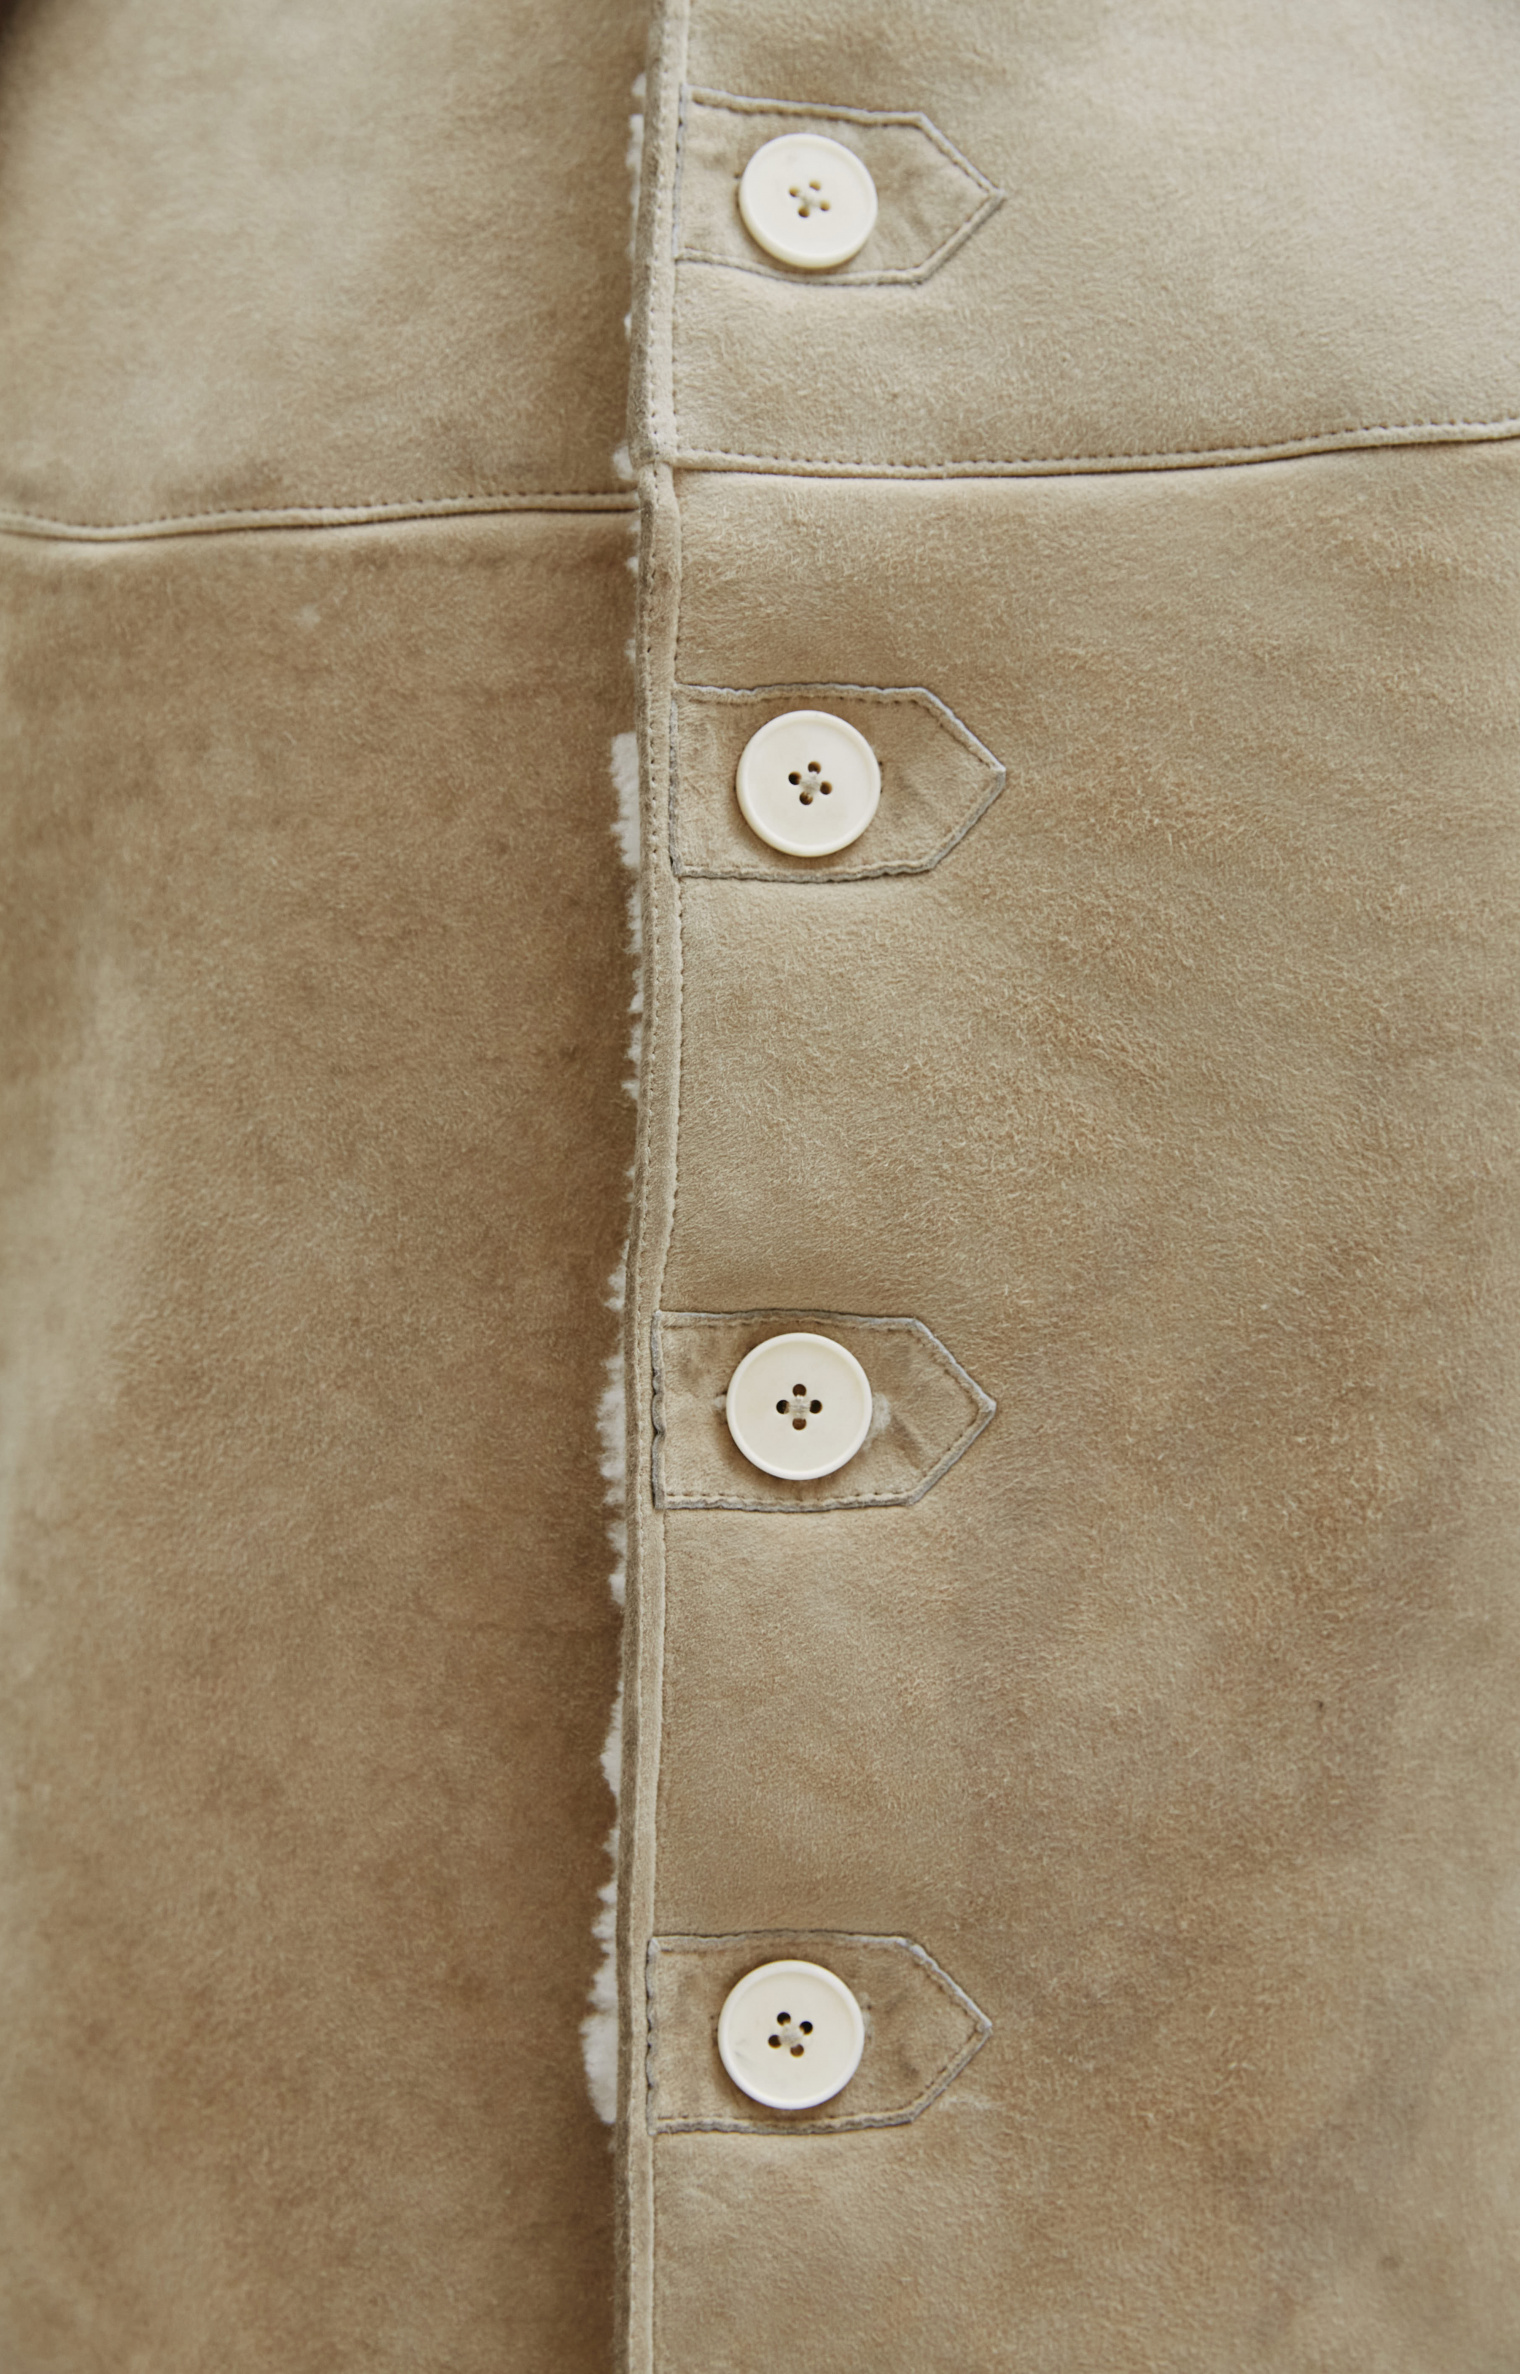 Maison Margiela Shearling jacket with knitted sleeves